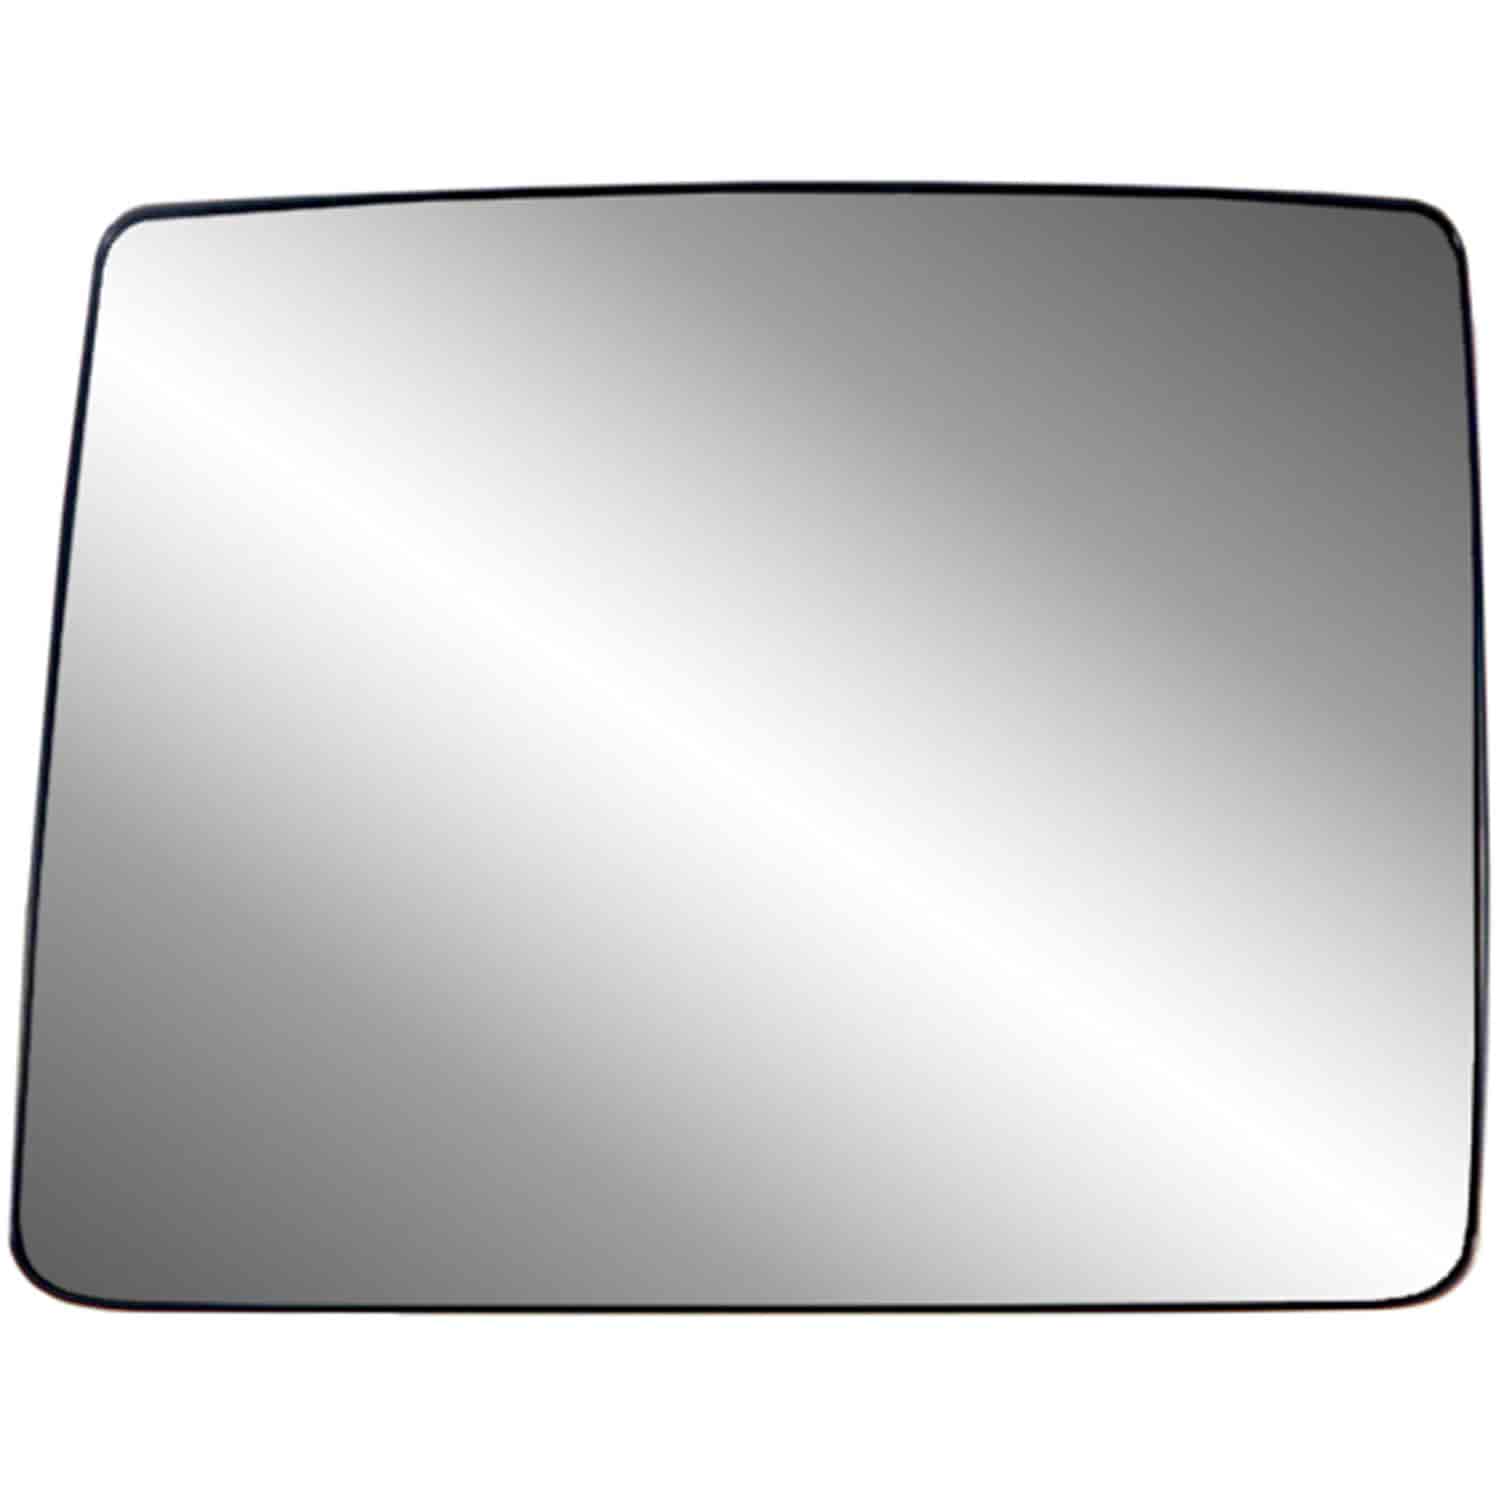 Replacement Glass Assembly for 04-12 F150 towing mirror top lens replace your cracked or broken driv